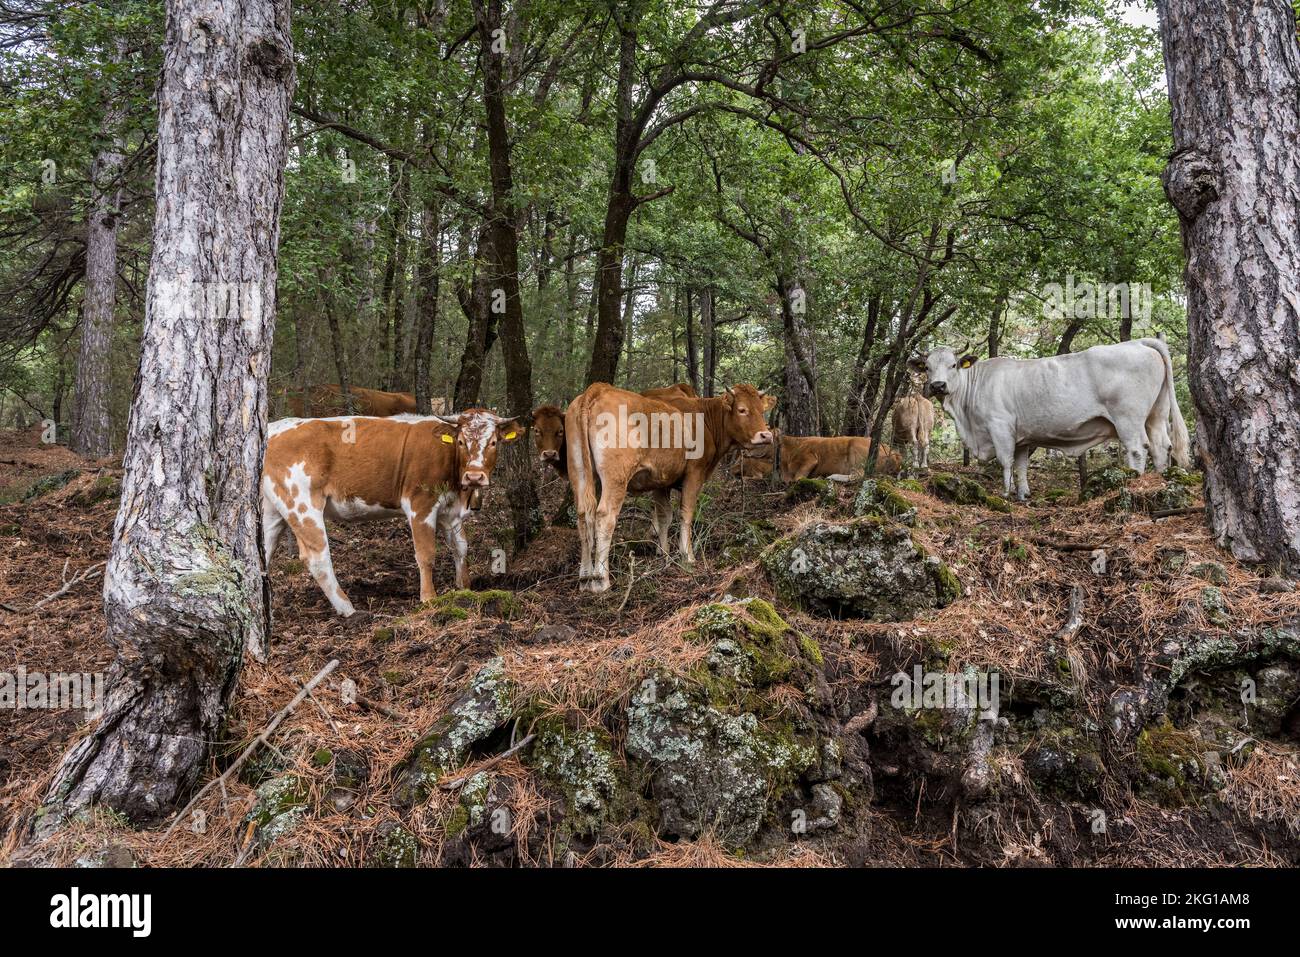 Cattle grazing in the pine forests that cover the upper slopes of Mount Etna, Sicily, Italy Stock Photo